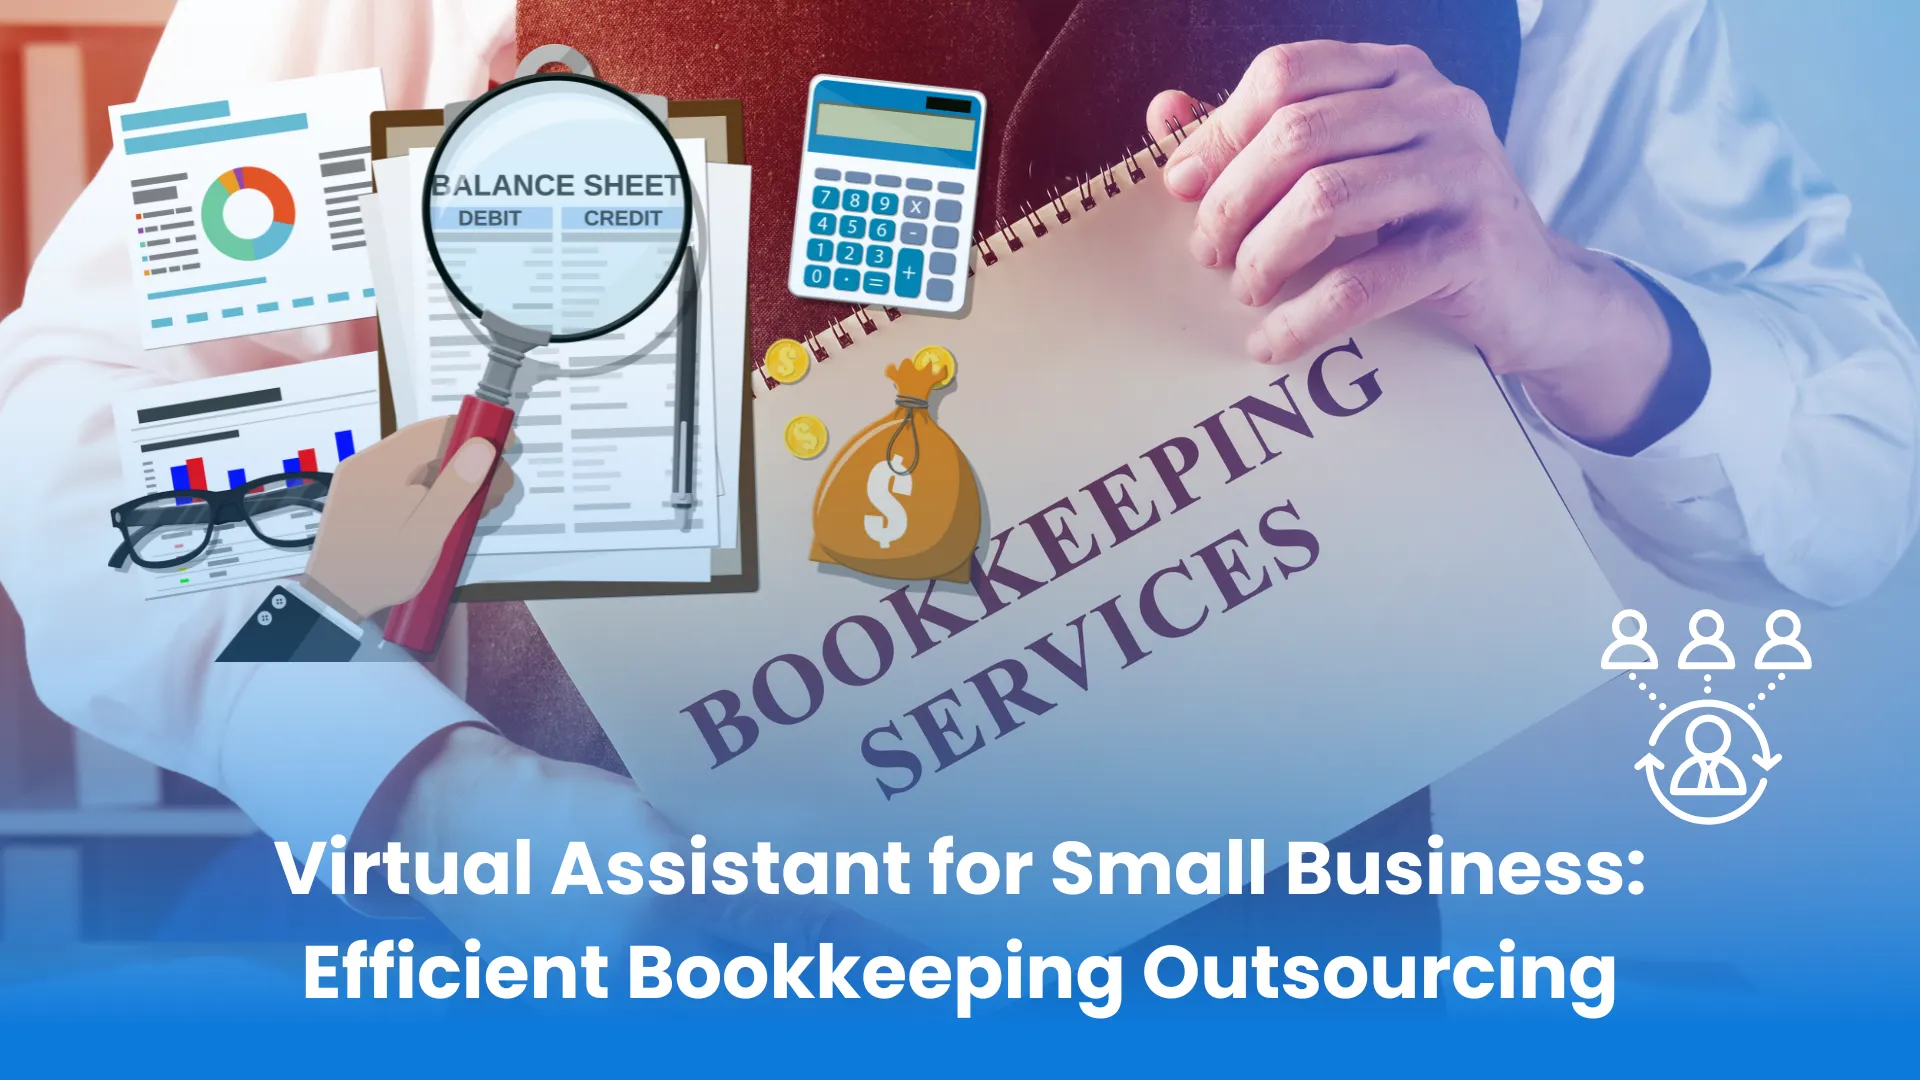 Looking for a virtual assistant specializing in efficient bookkeeping outsourcing for small businesses? Look no further!